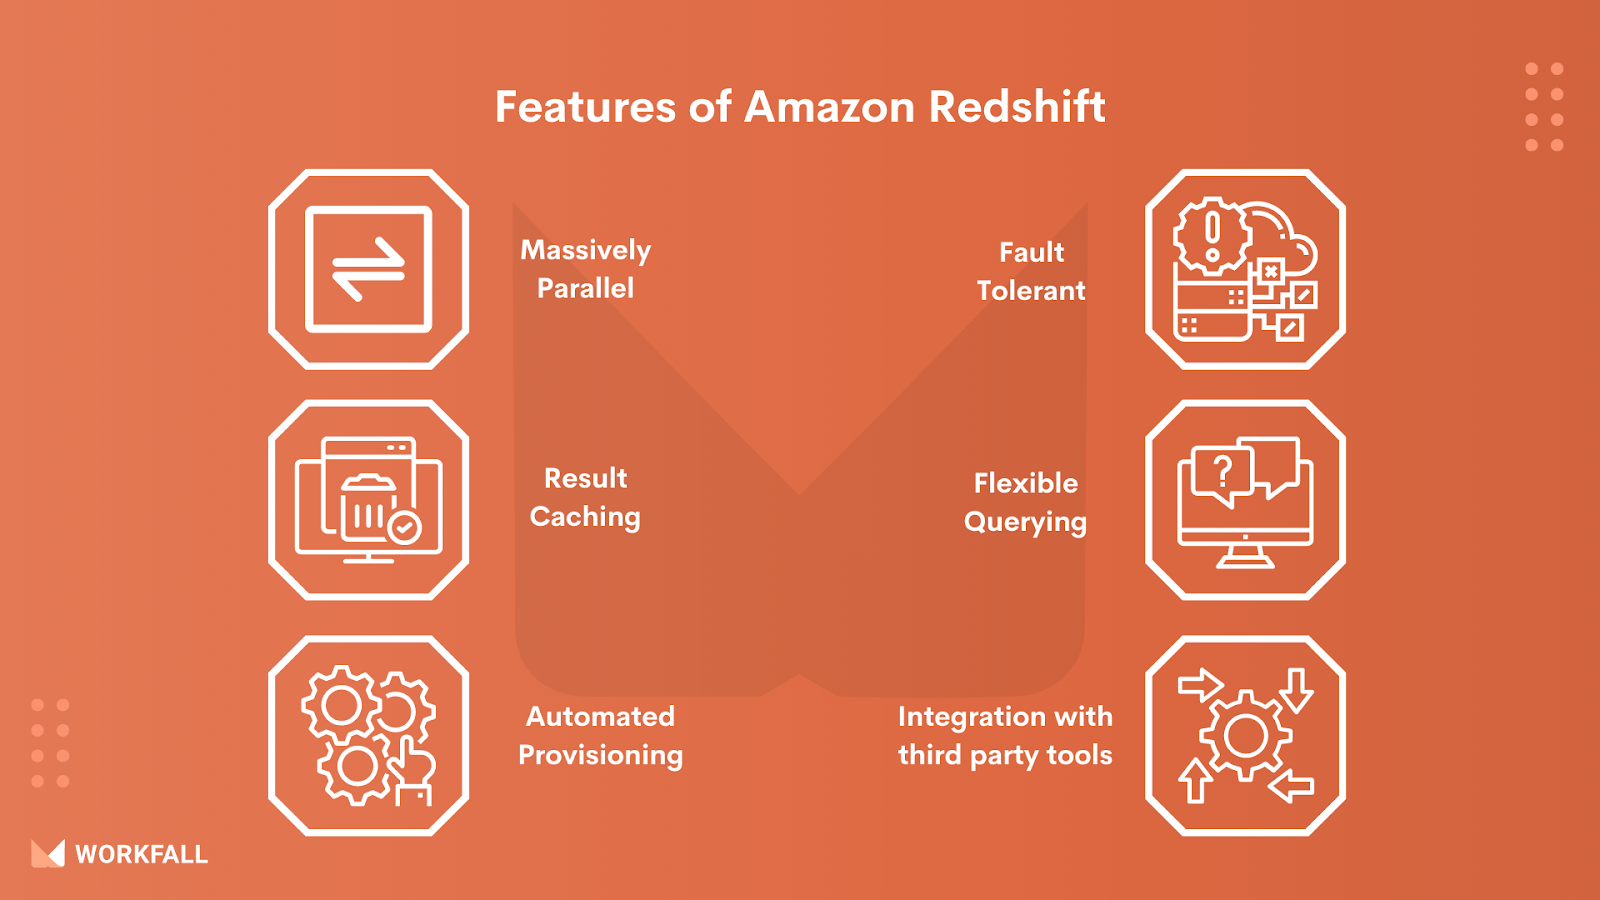 Features of Amazon Redshift